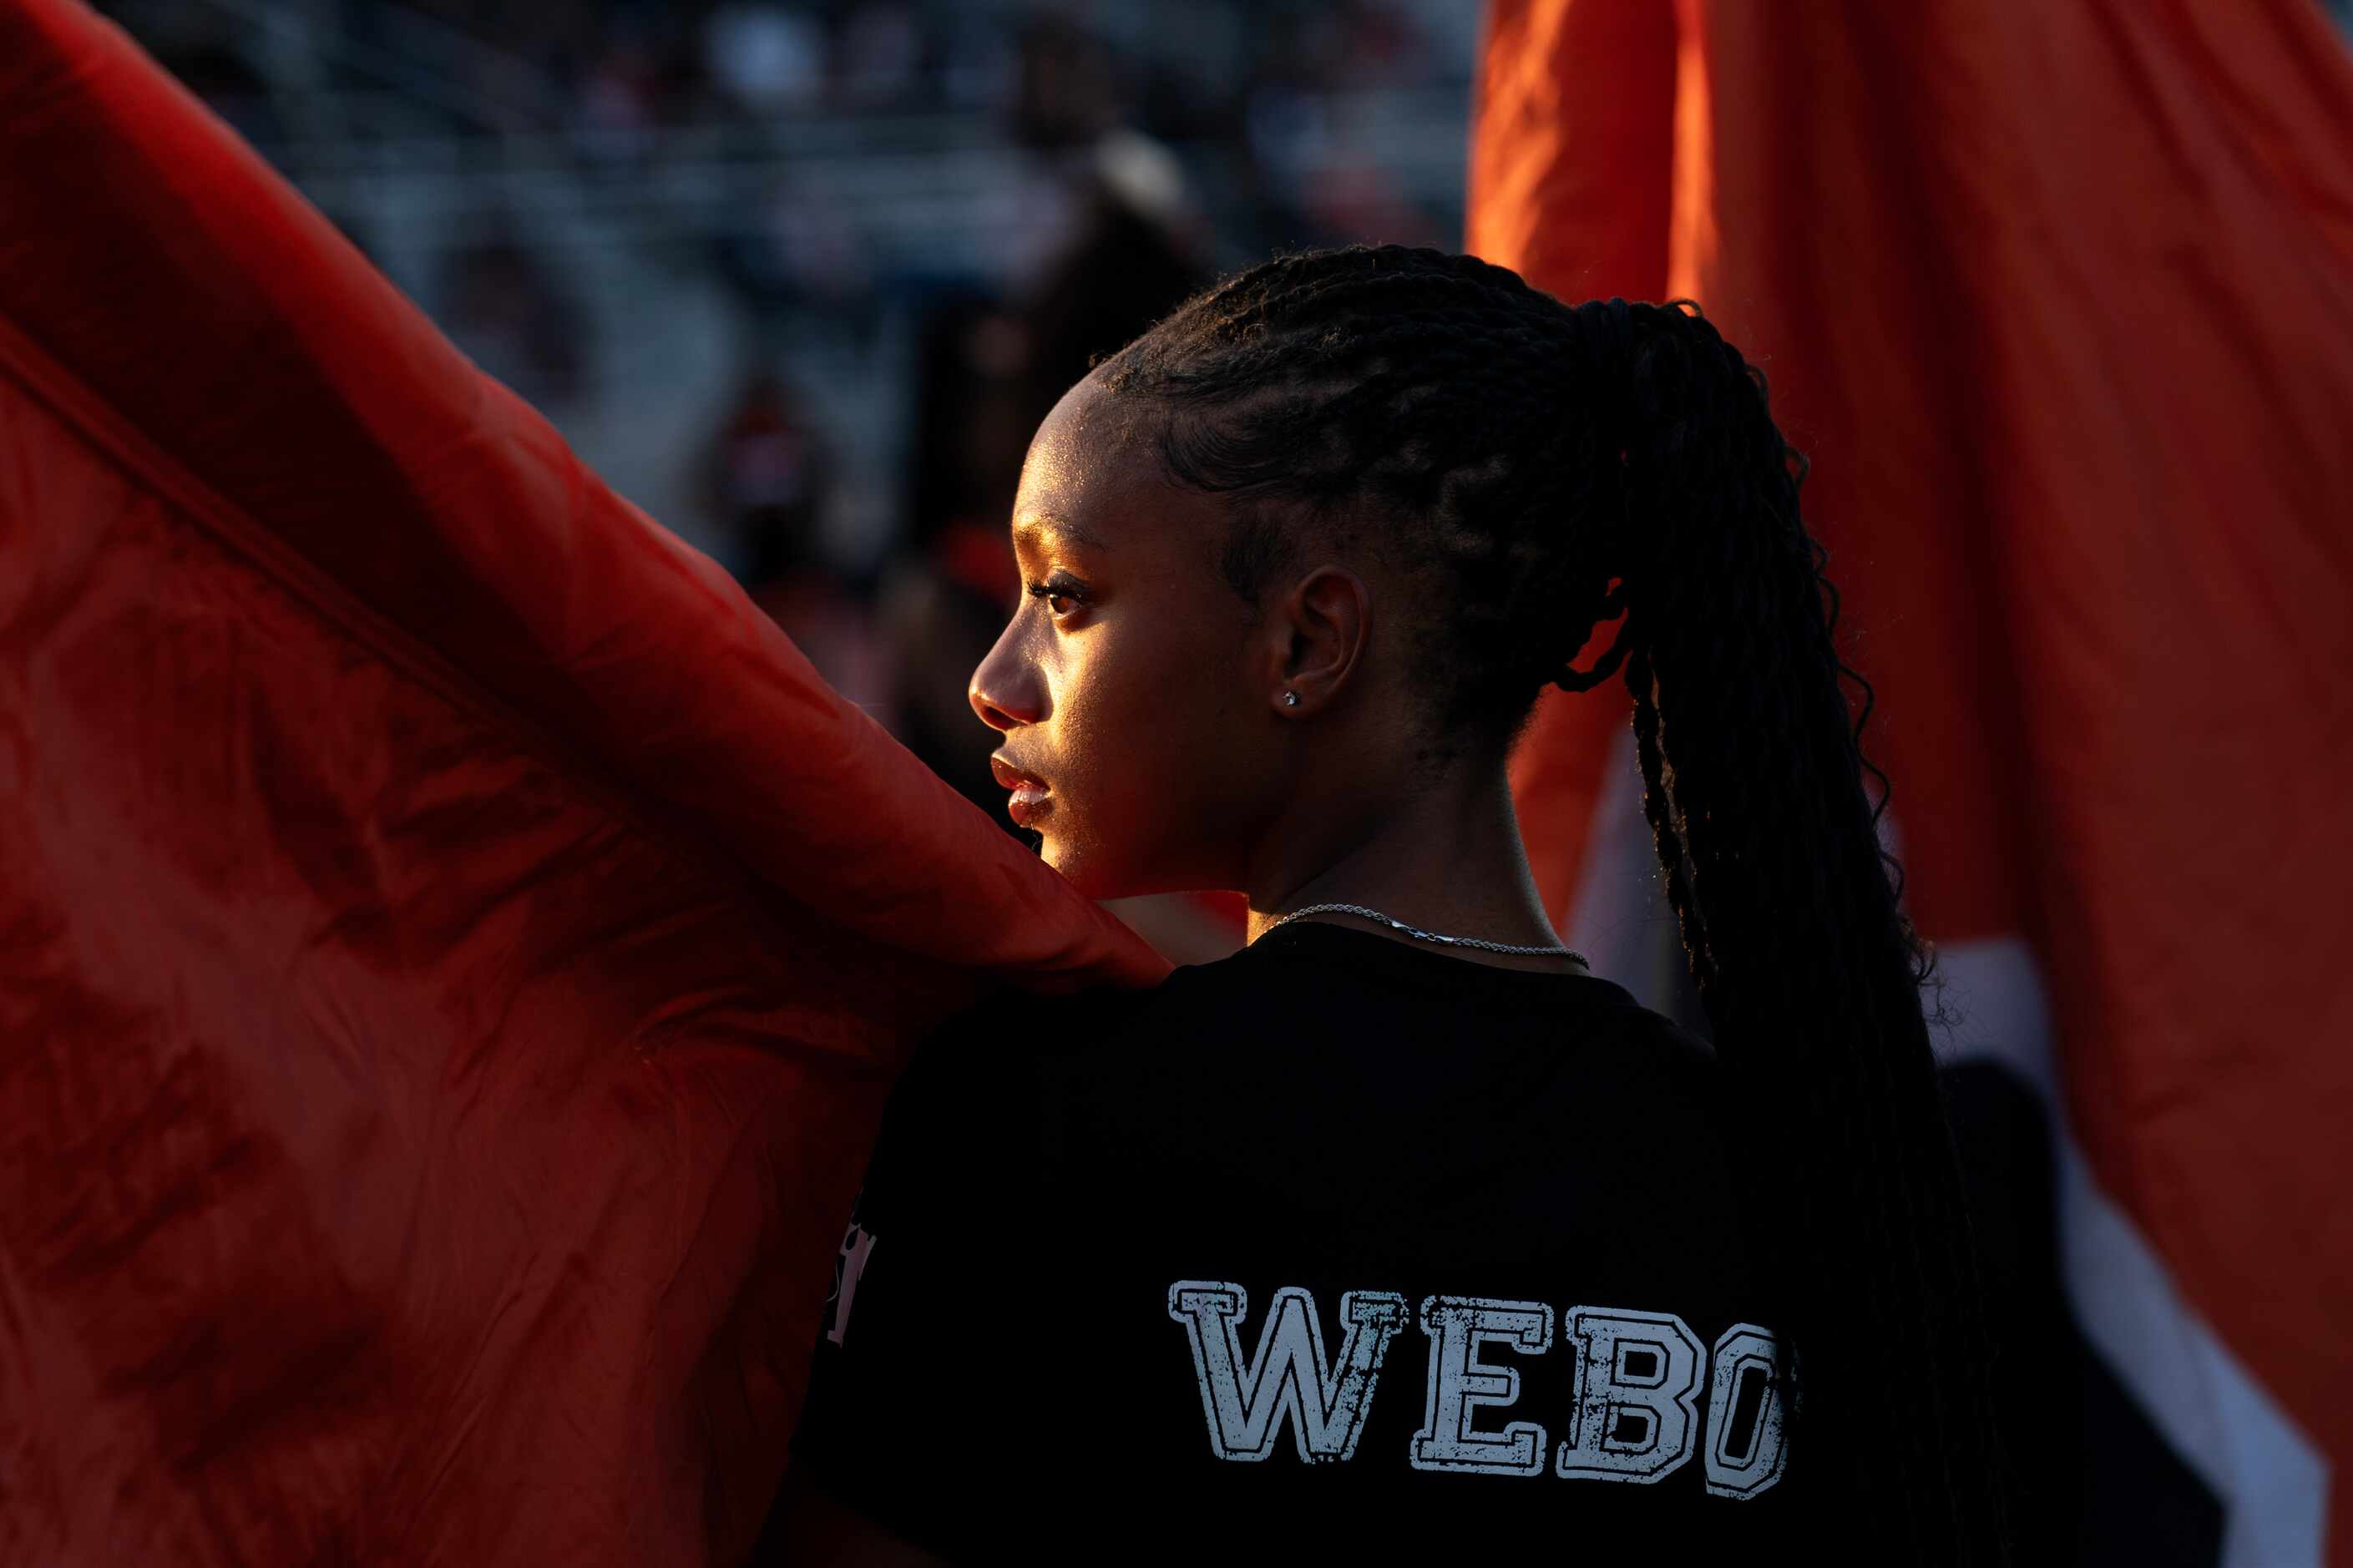 Milan Lathan, a member of the Lancaster girls track team, prepares to run a flag onto the...